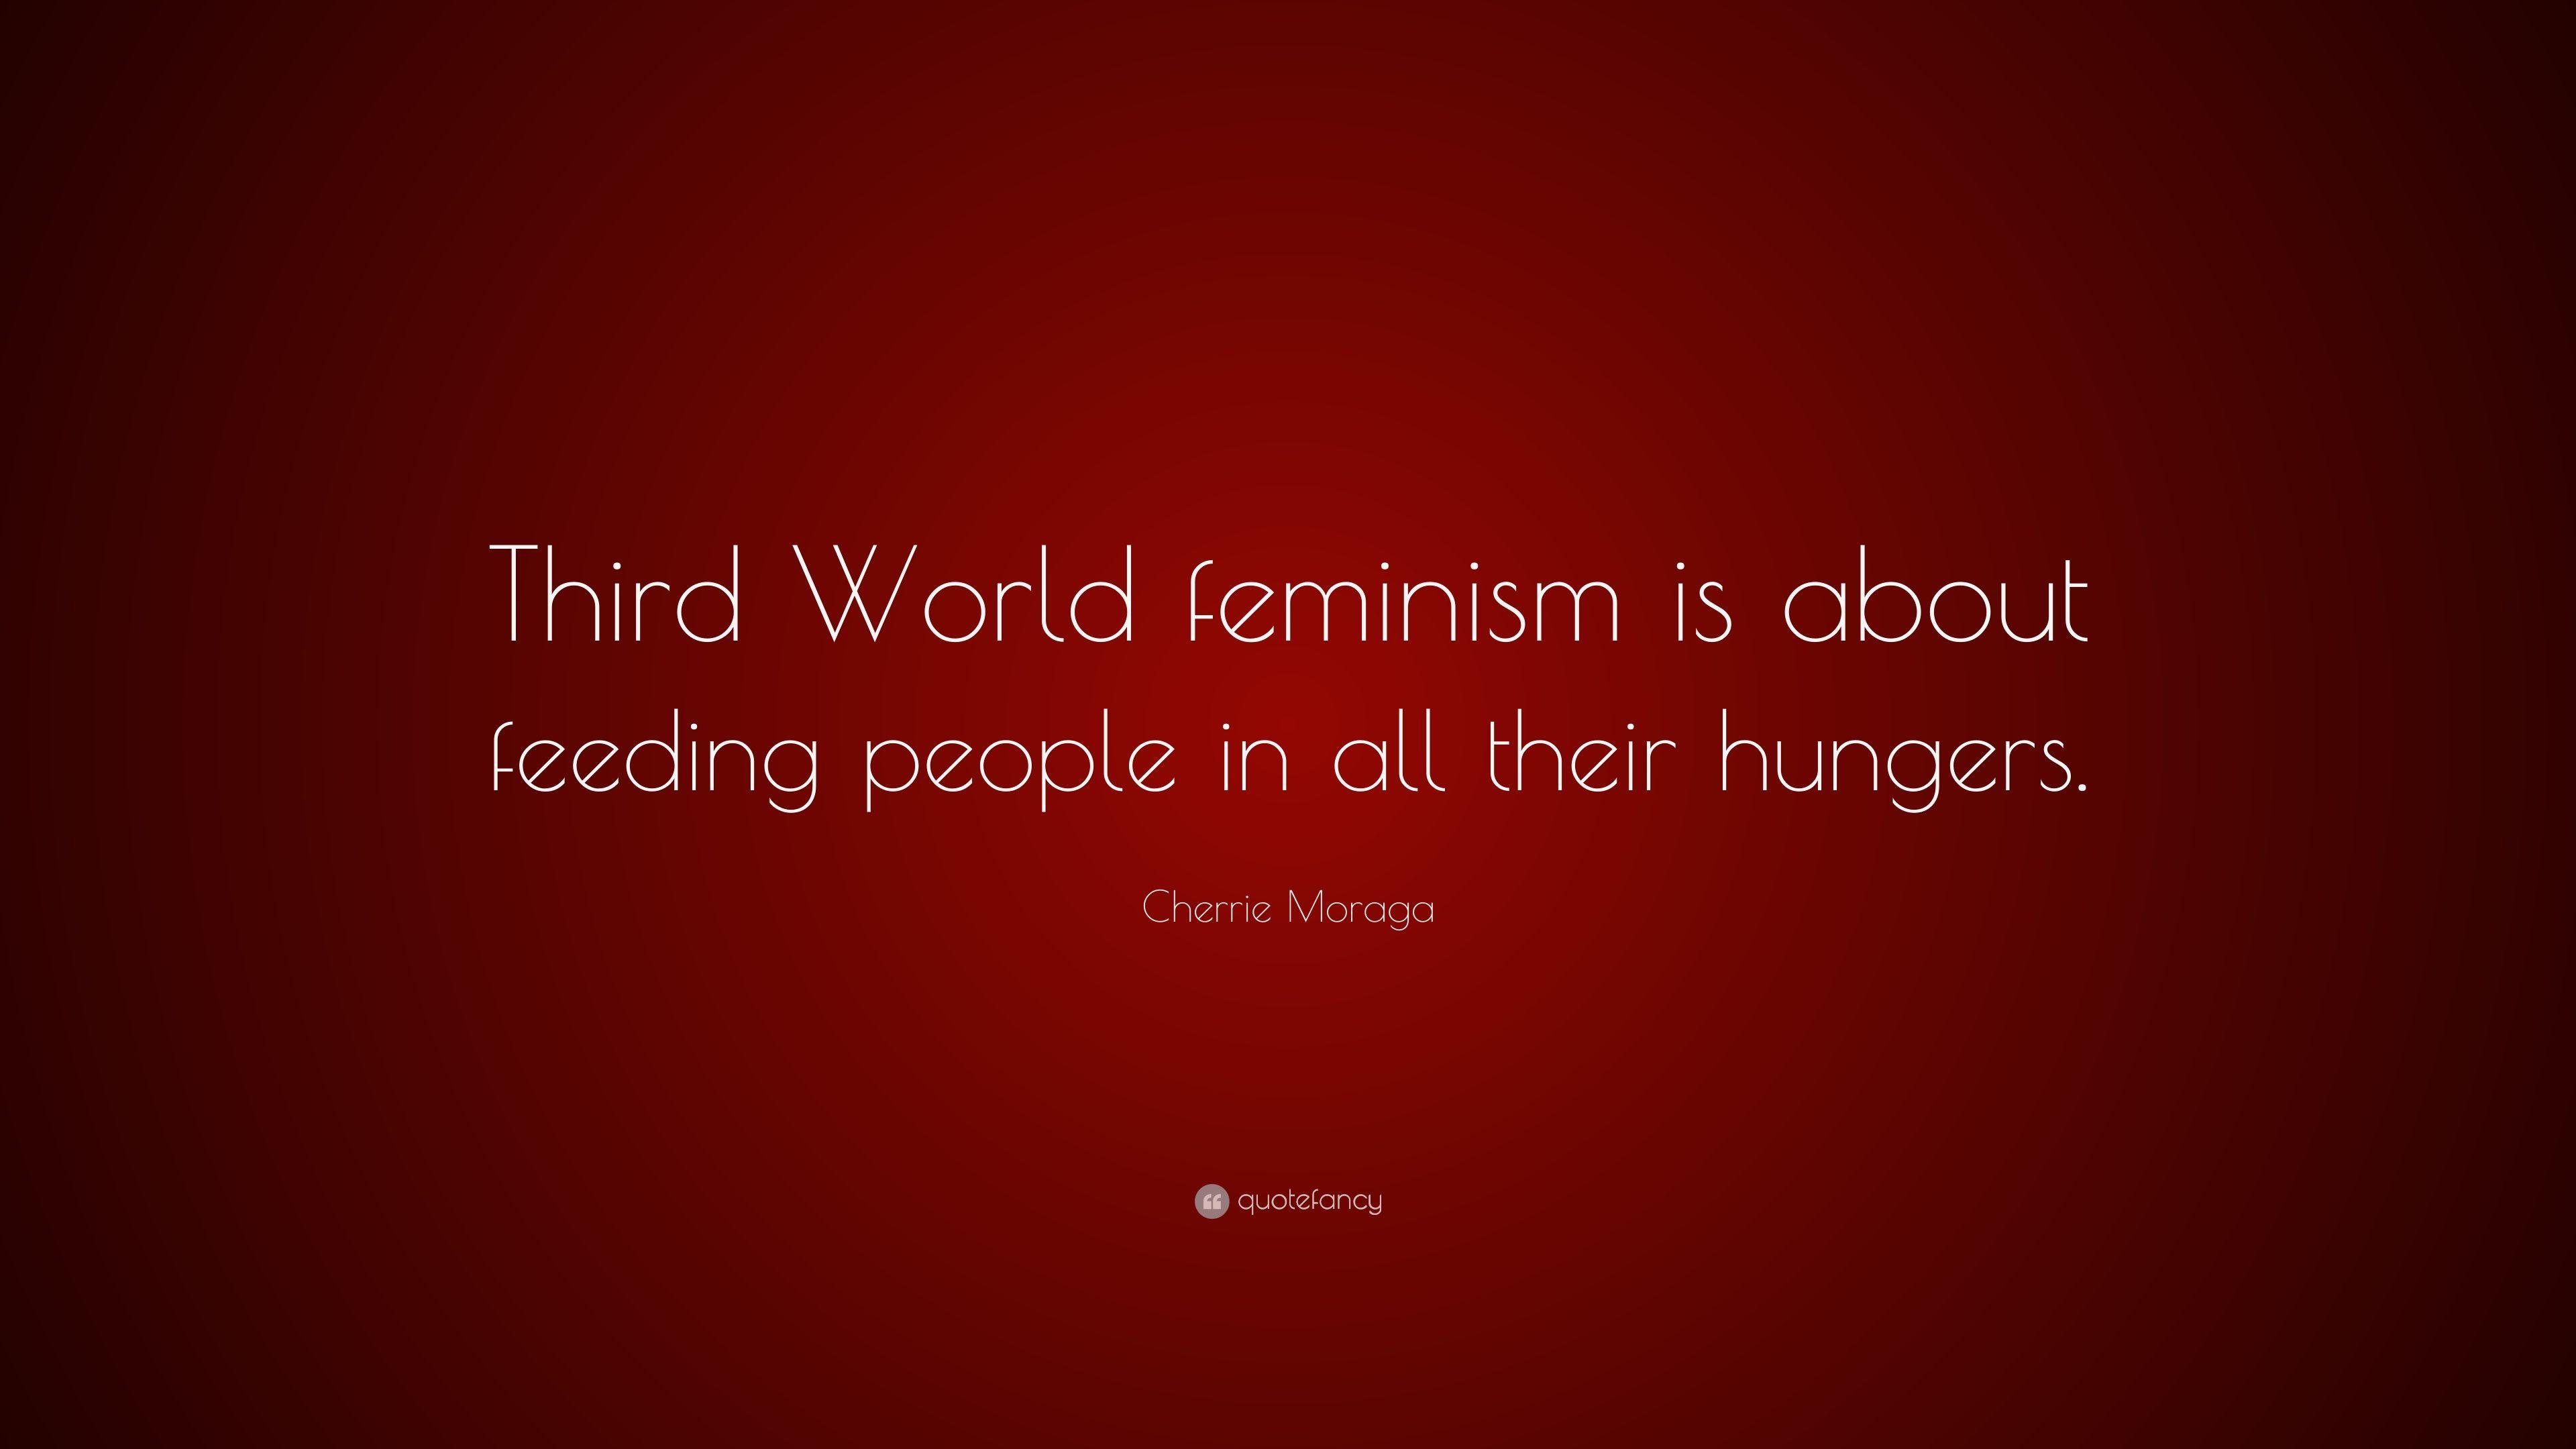 Cherrie Moraga Quote: “Third World feminism is about feeding